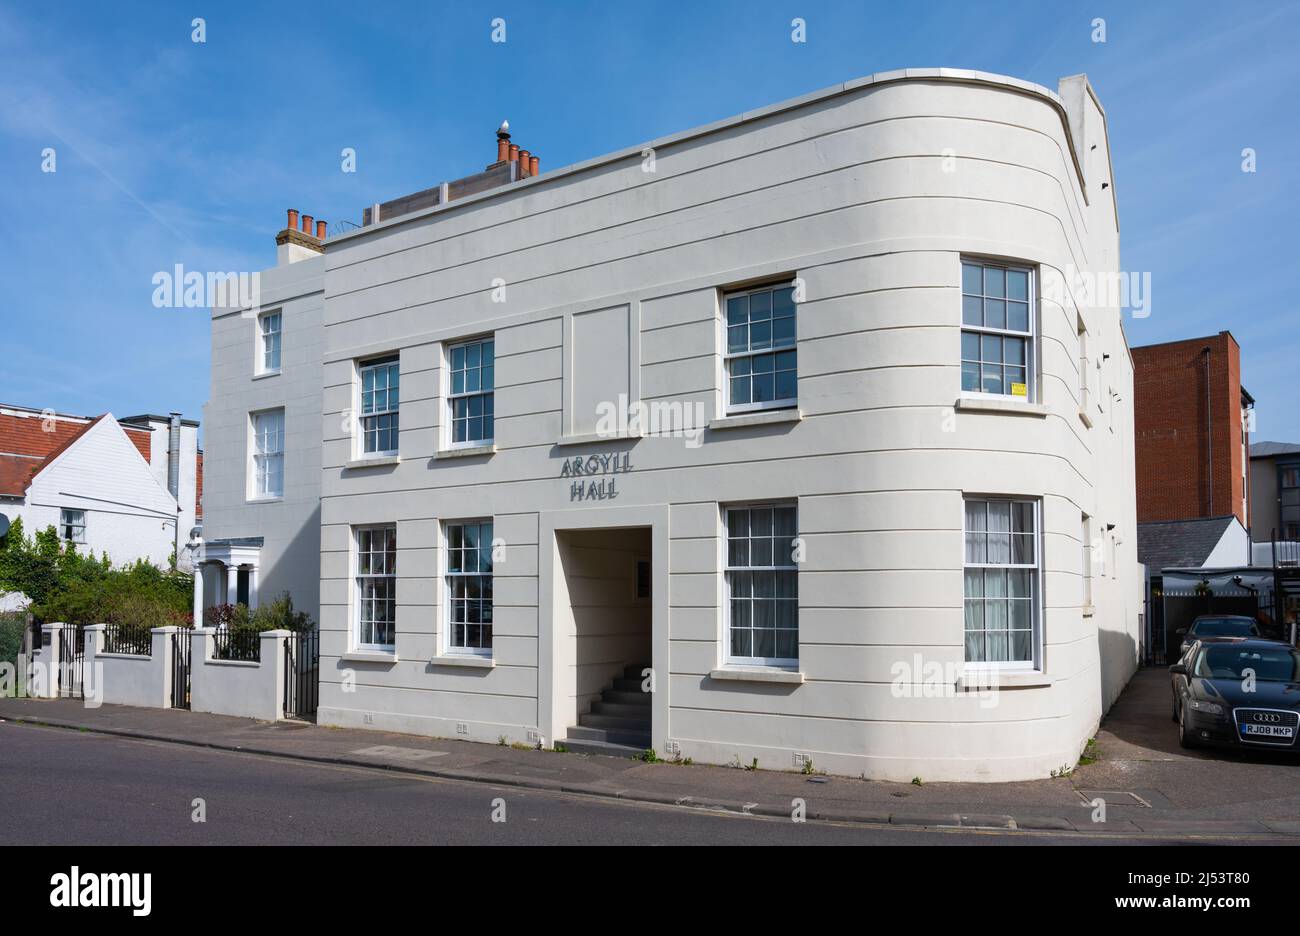 Argyll Hall, a block of 5 apartments or flats in a modern white building in Littlehampton, West Sussex, England, UK. Stock Photo